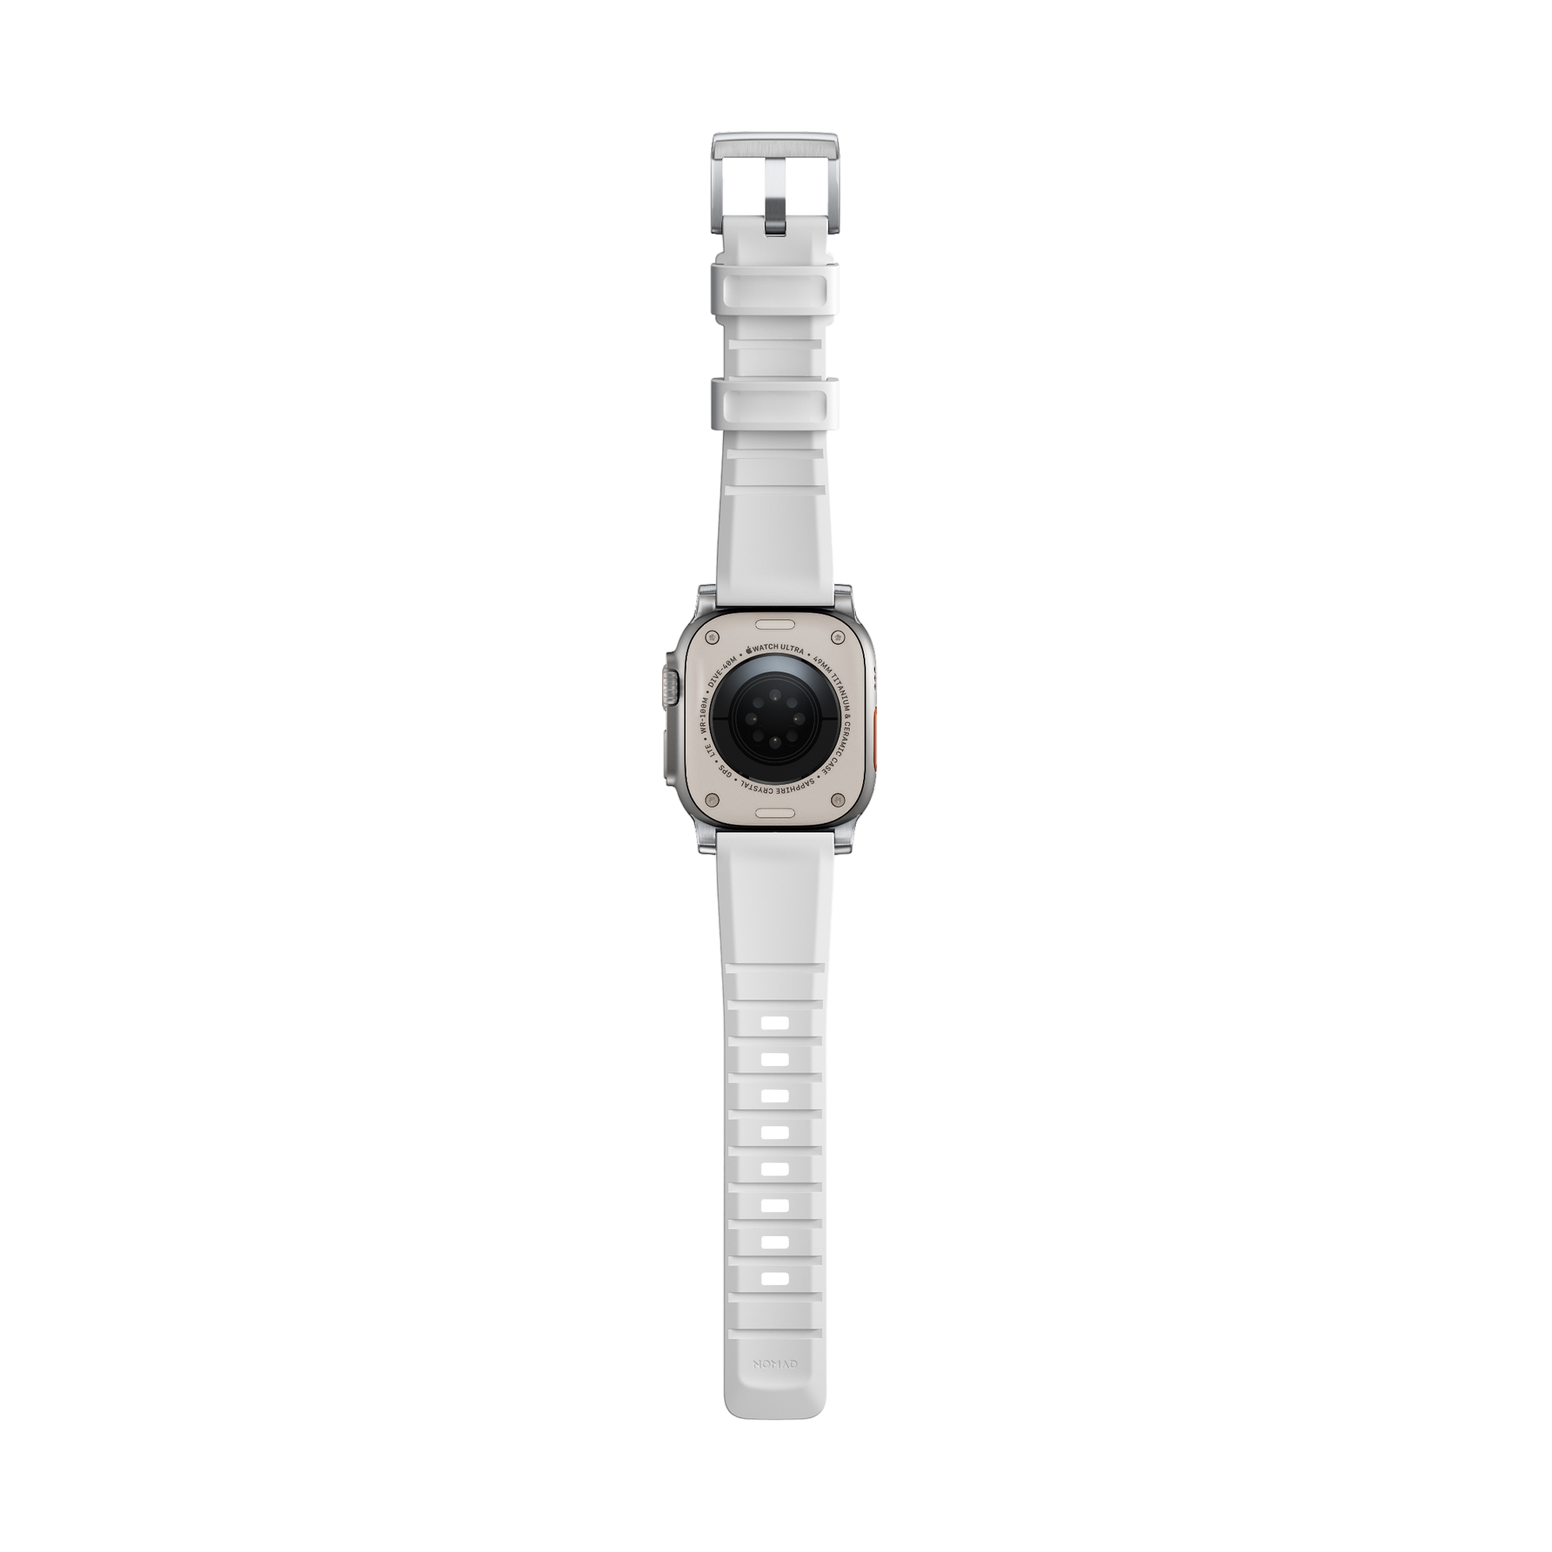 Nomad Rugged Band - 45/49mm - White - Silver Hardware - Limited Edition - Exclusive to MegaMac - Open Box